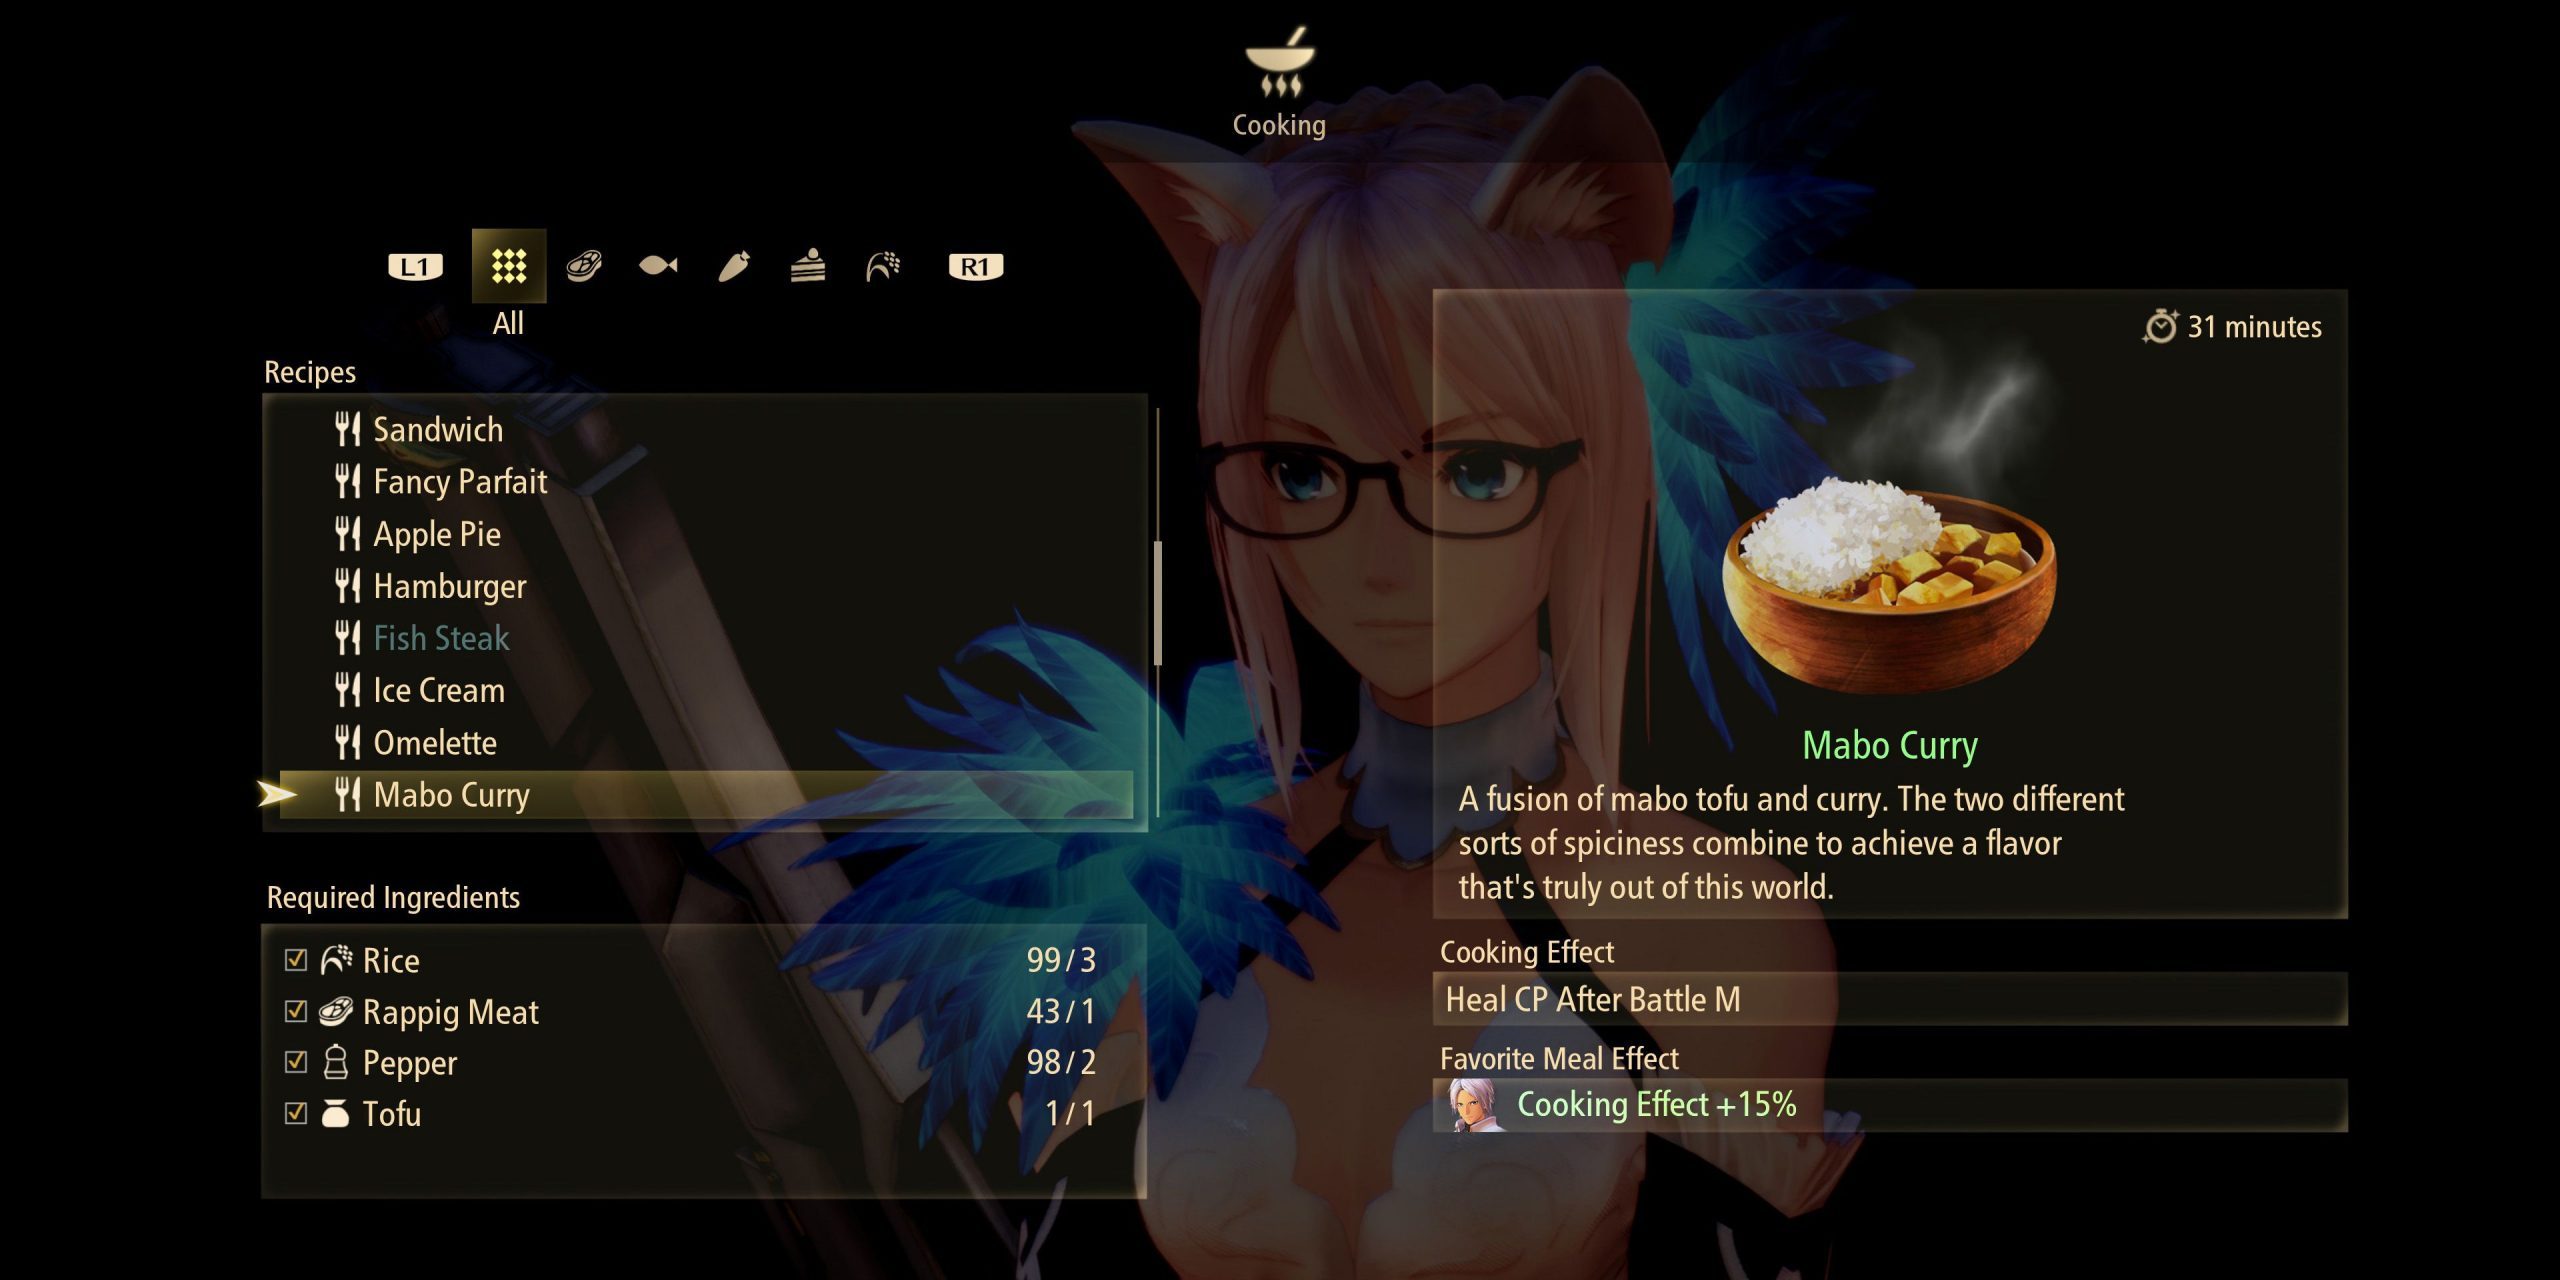 tales-of-arise-cooking-recipes-22-mabo-curry-7455981